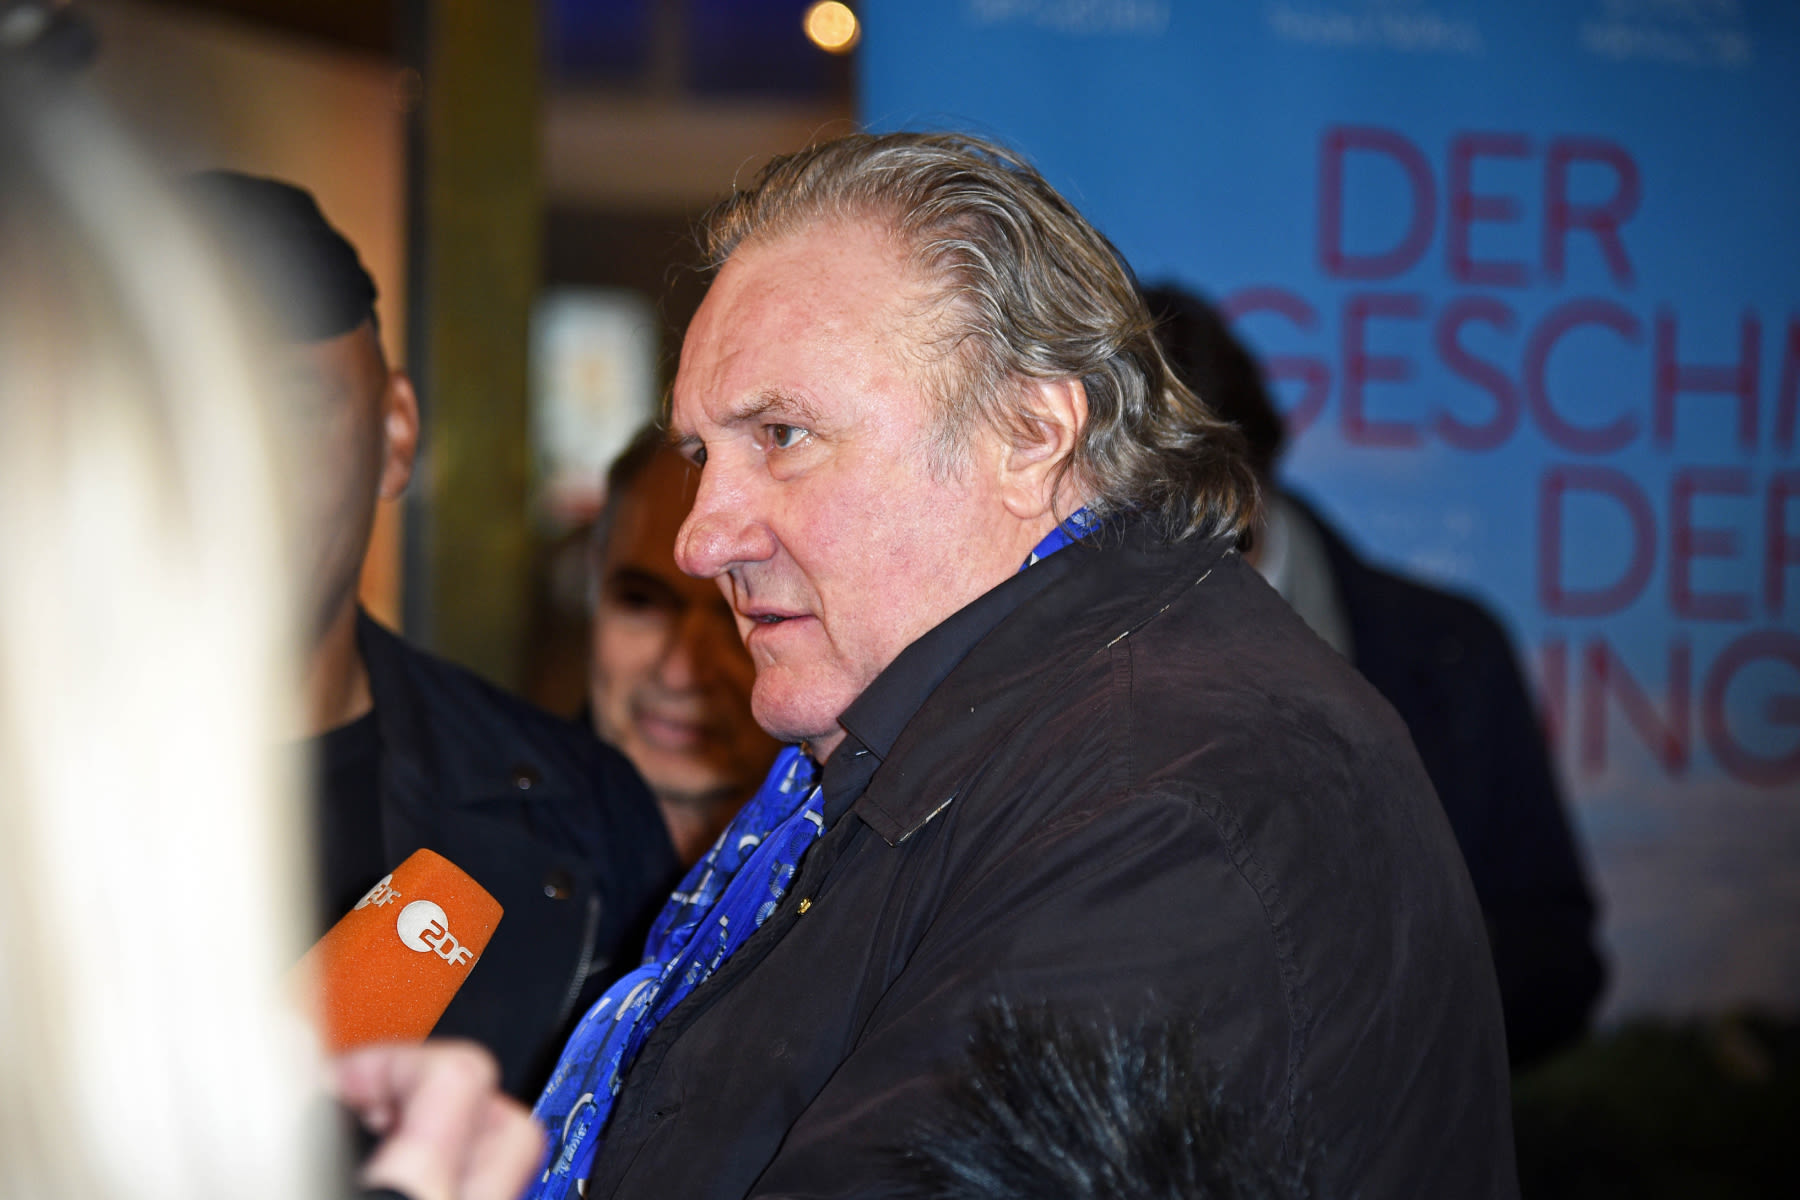 Gerard Depardieu to Stand Trial on Criminal Sexual Assault Charges